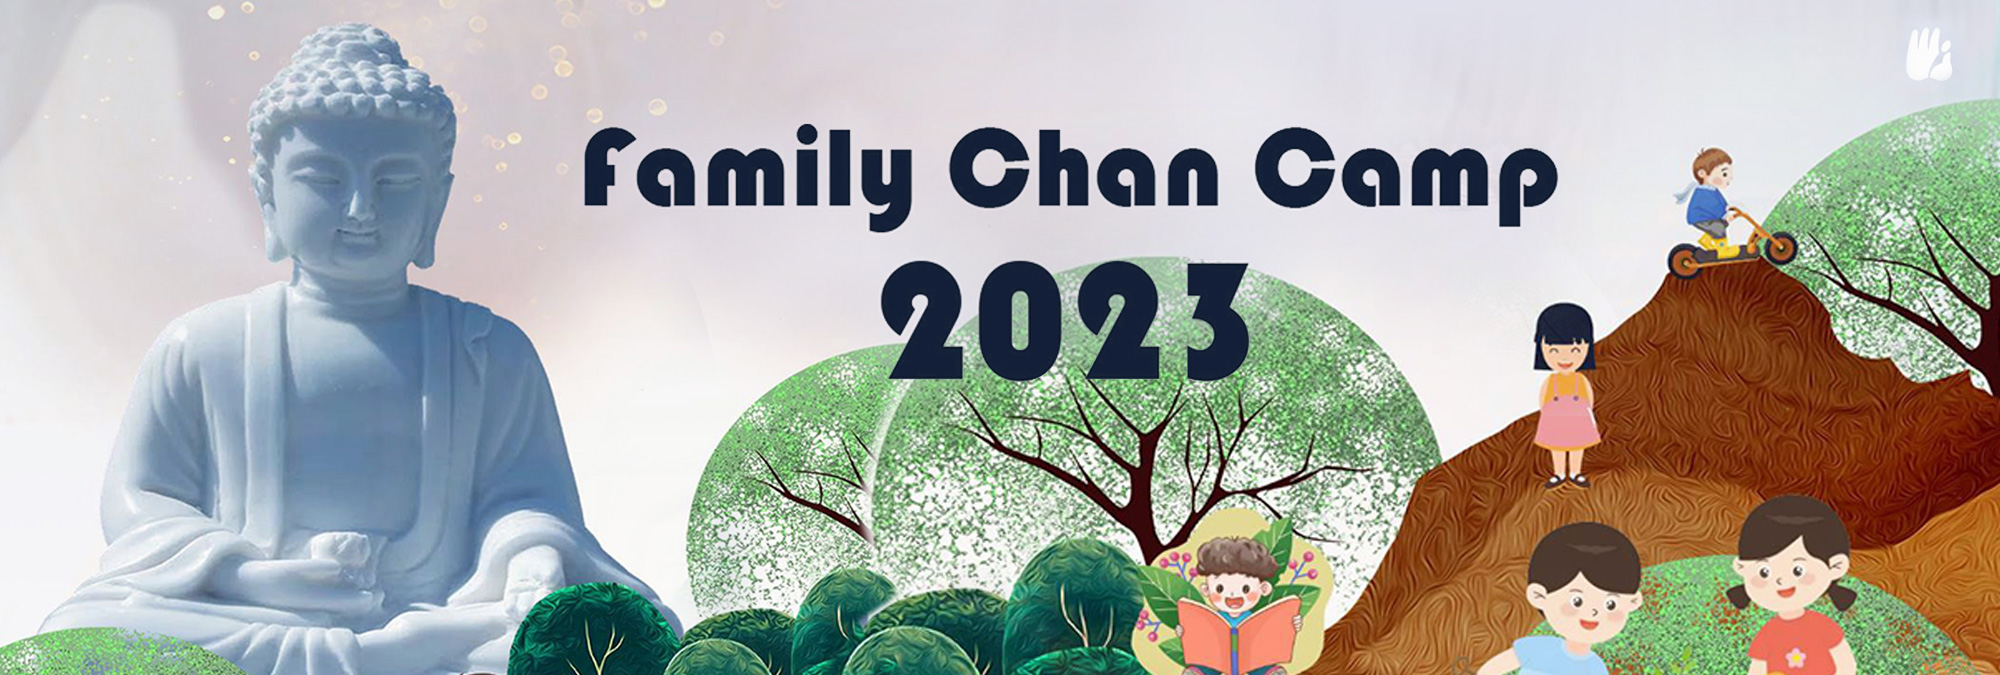 2023 Family Chan Camp